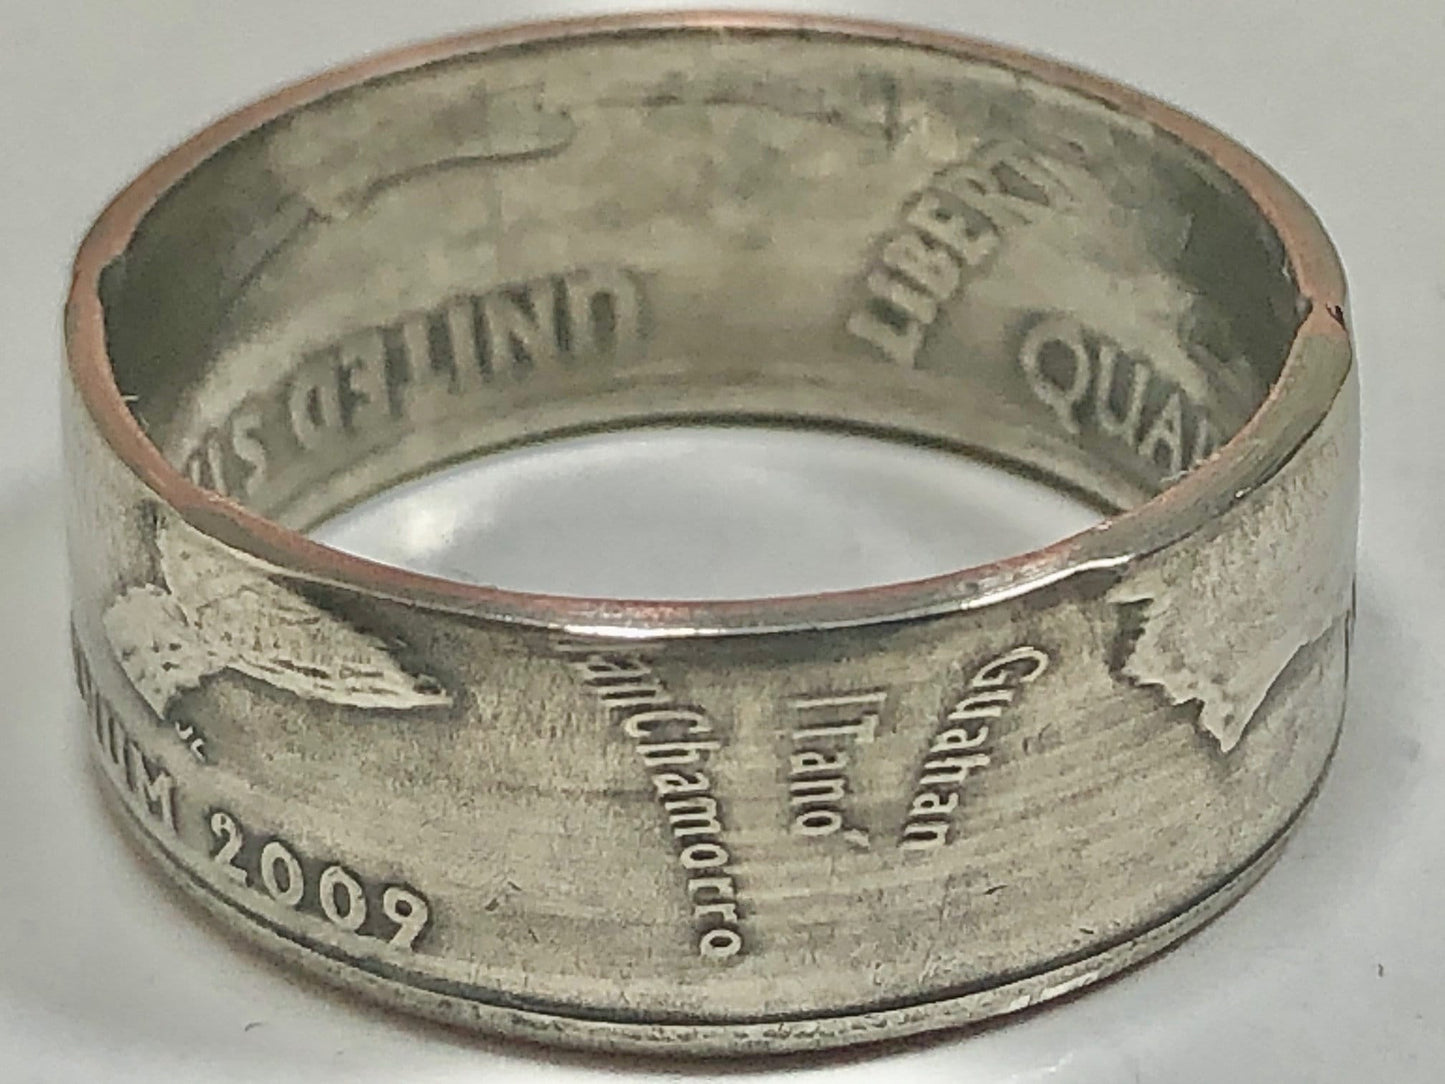 Guam Ring Quarter Coin Ring Handmade Personal Jewelry Ring Gift For Friend Coin Ring Gift For Him Her World Coin Collector